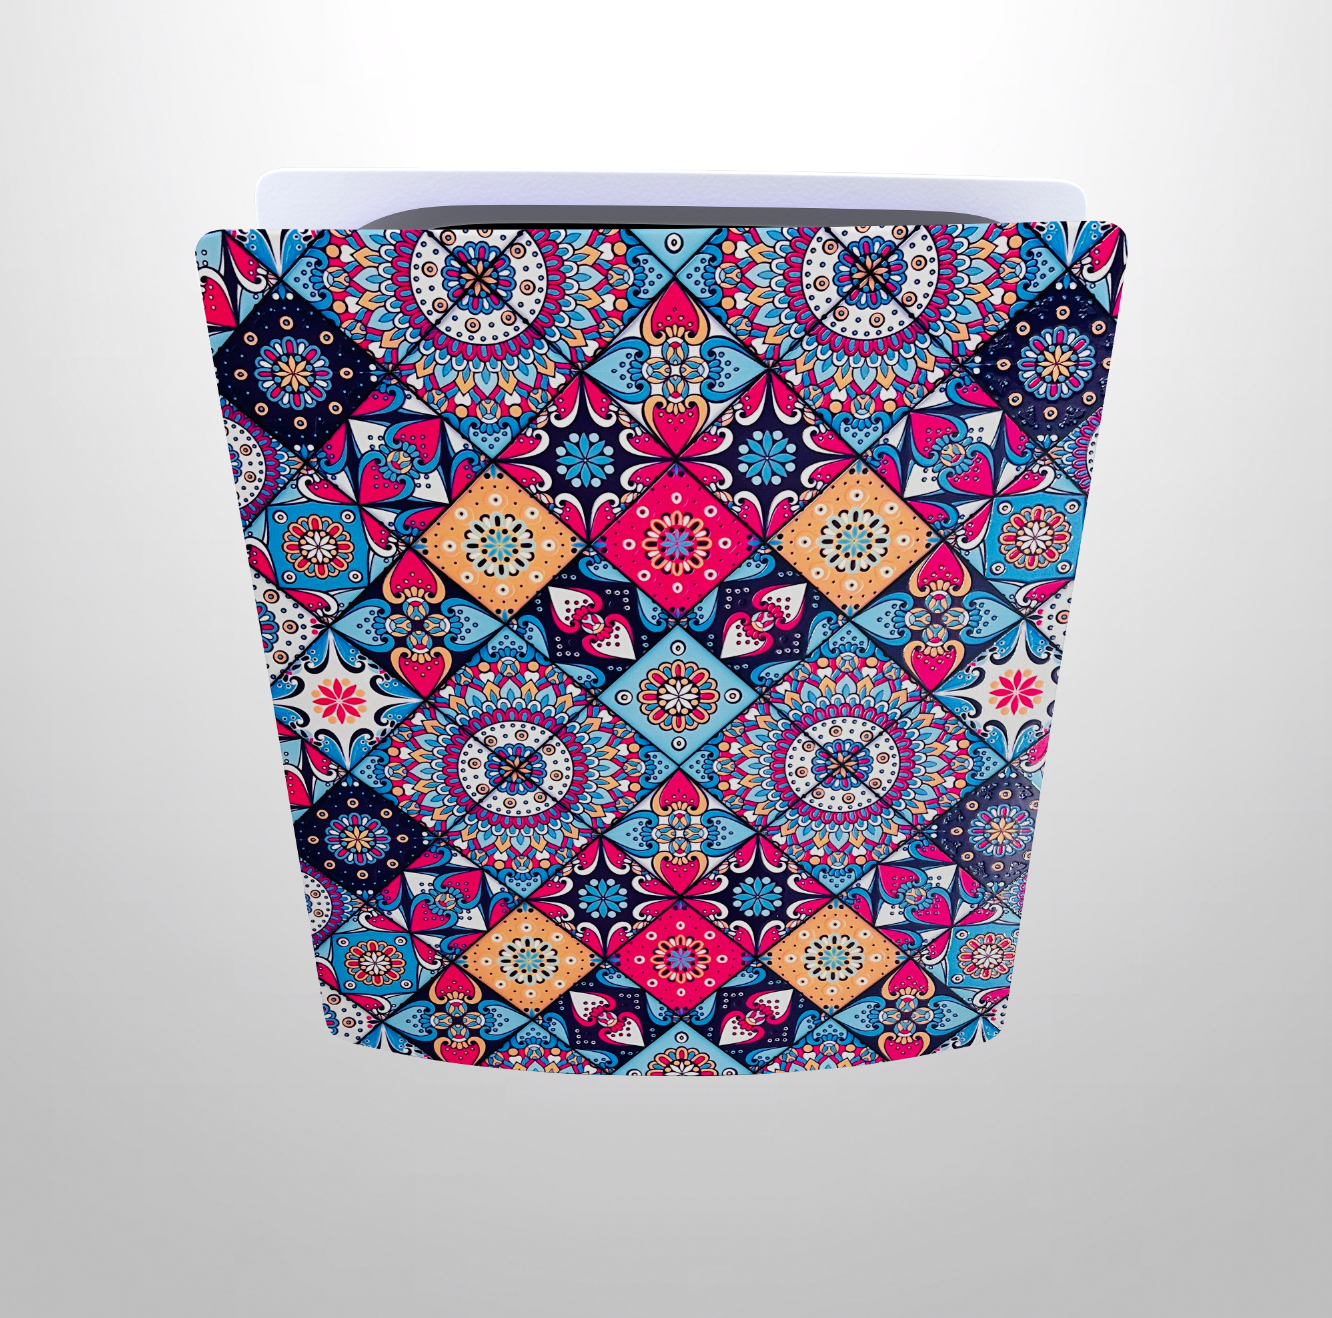 Ethnic Floral Print PS 5 3D Finish Skin